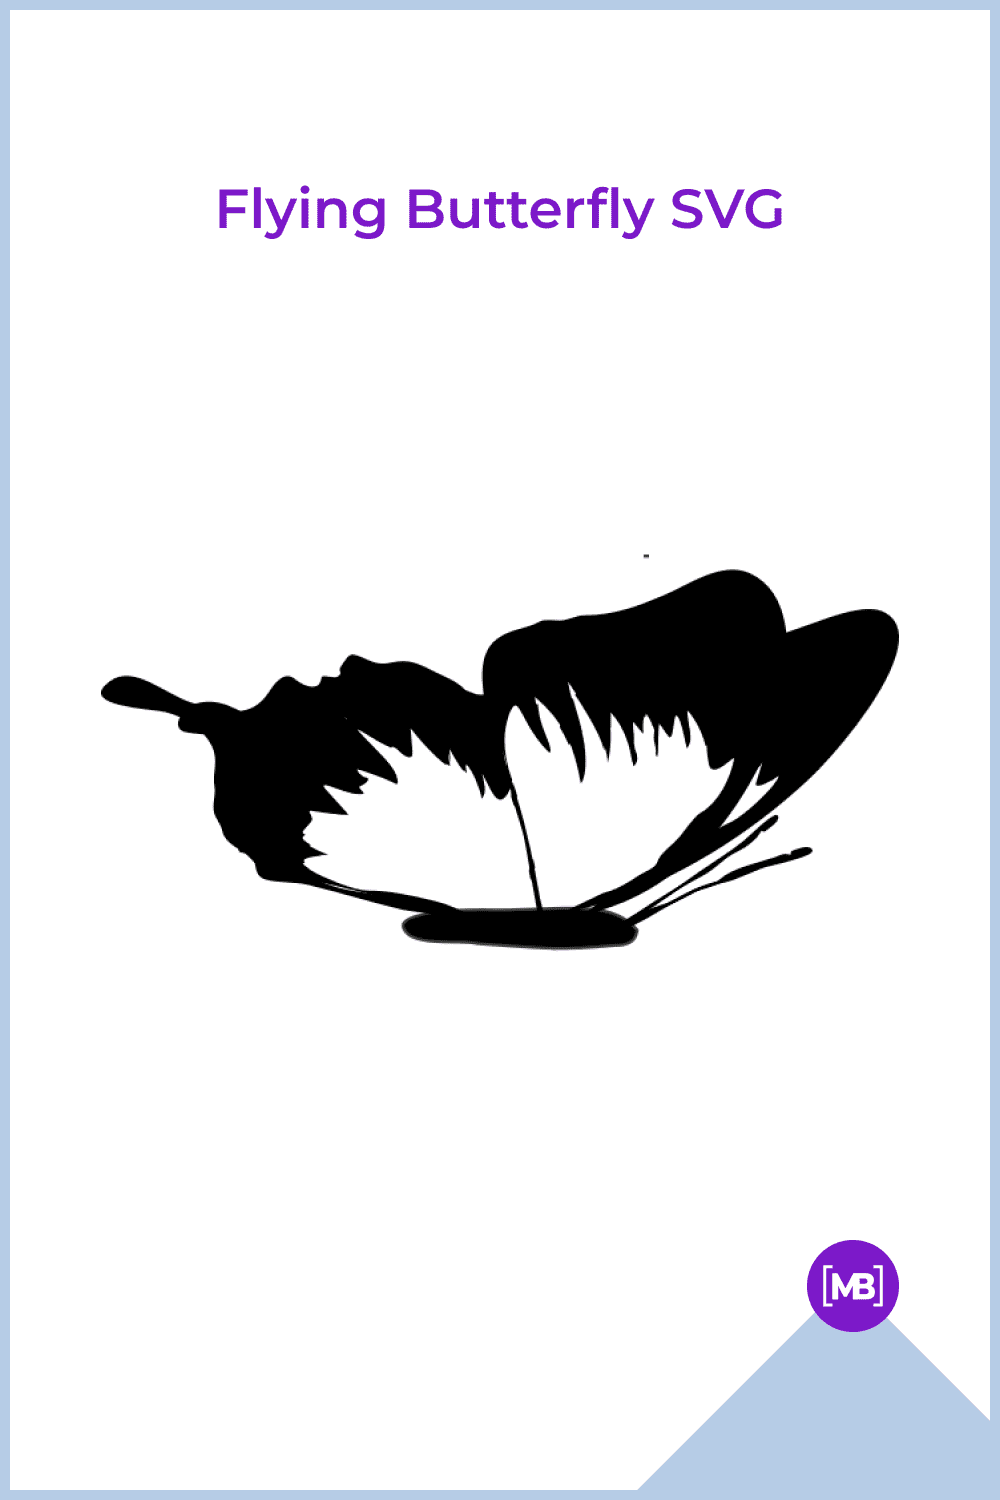 Flying Butterfly SVG.